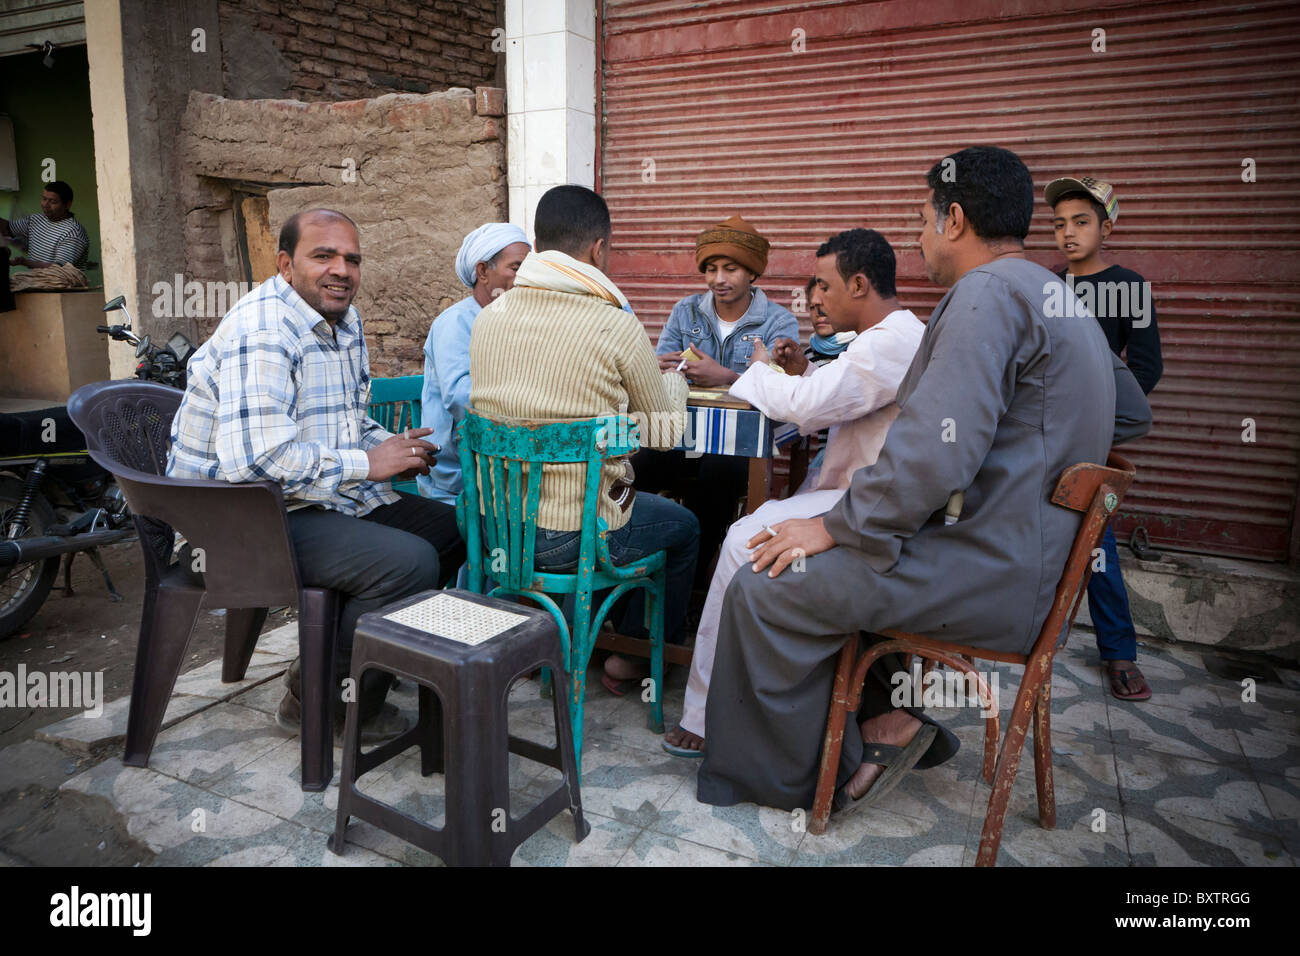 Men sitting playing dominoes outside a cafe at a local street market, Luxor, Egypt, Africa Stock Photo